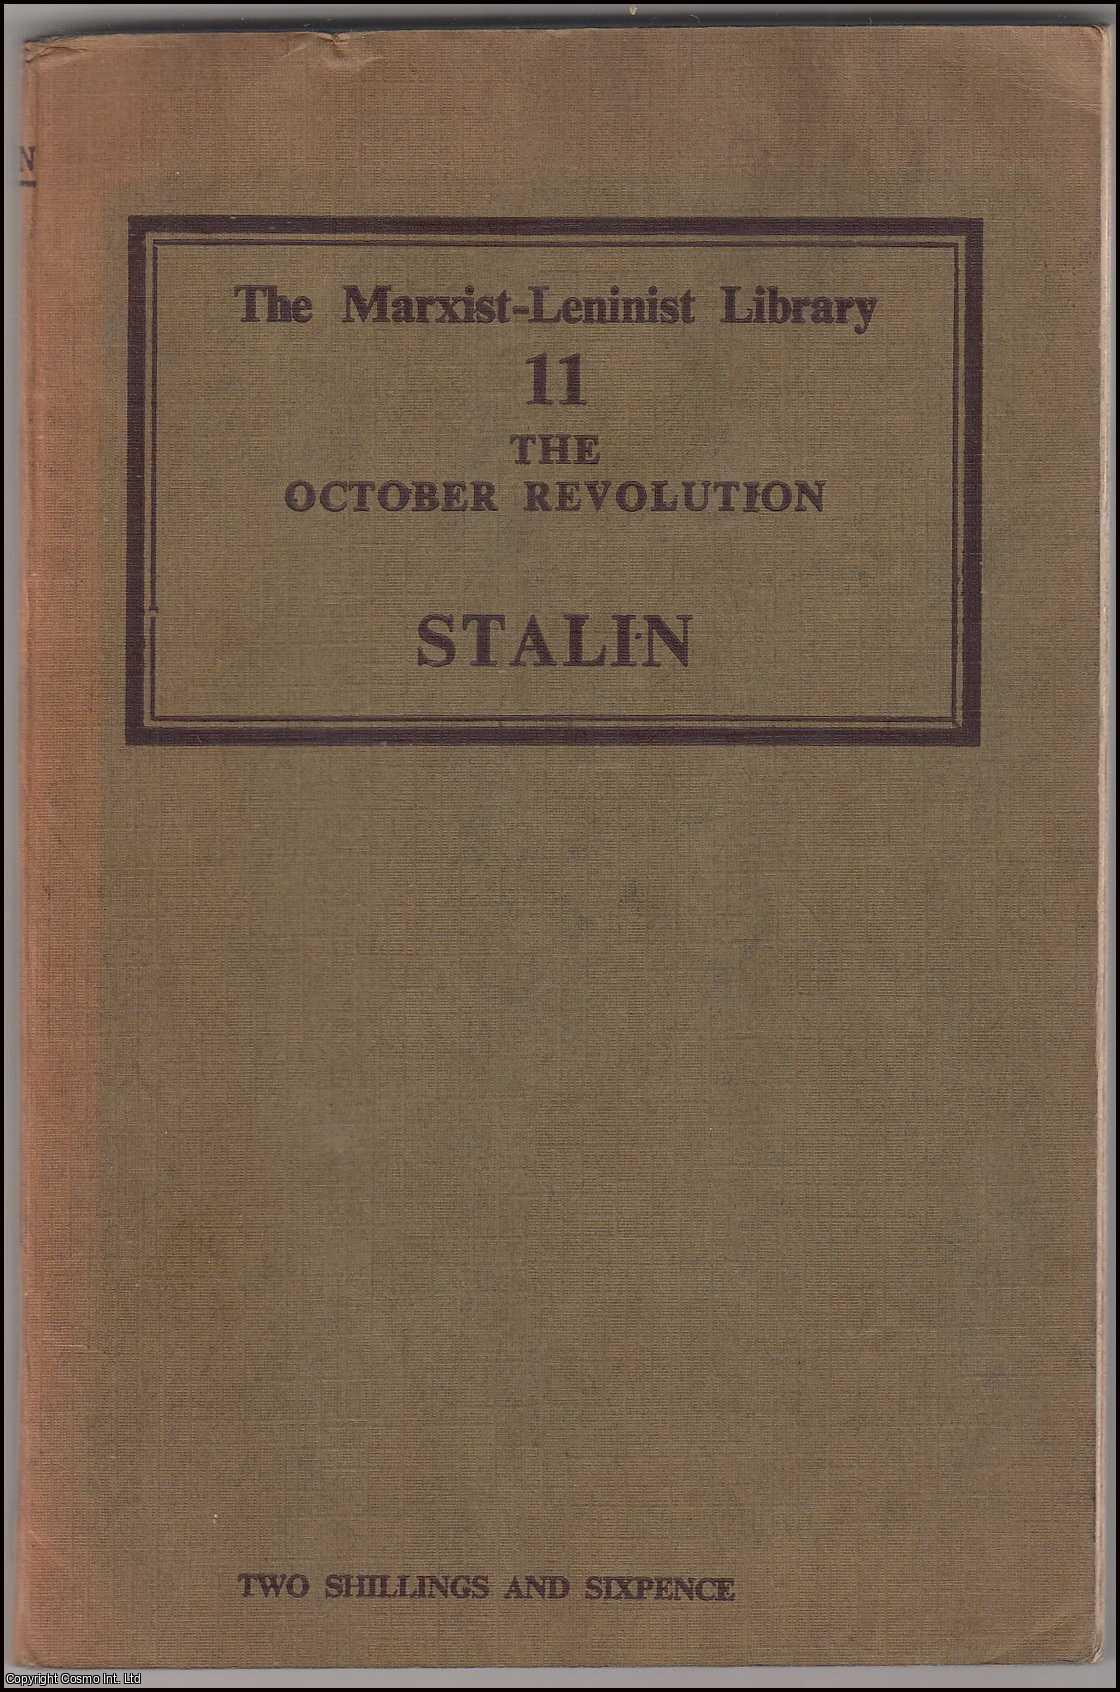 Stalin - The October Revolution. The Marxist Lenin Library, Volume Eleven. Published by Lawrence & Wishart 1941.